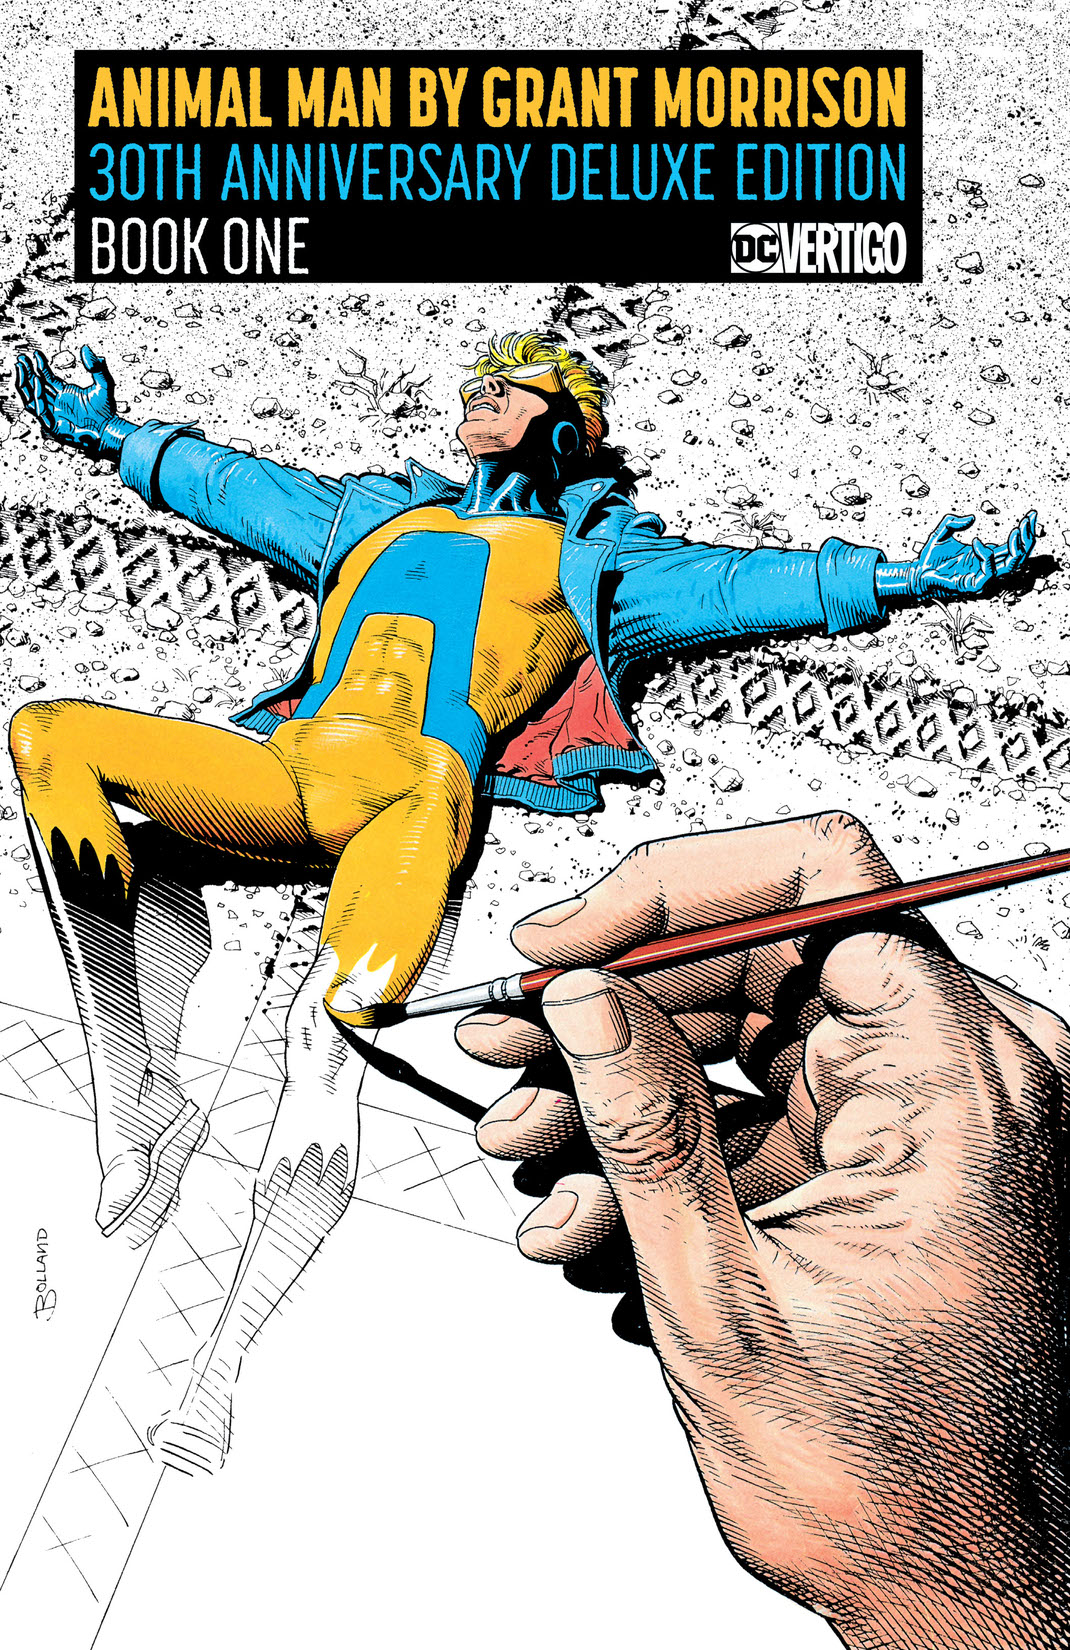 Animal Man by Grant Morrison Book One 30th Anniversary Deluxe Edition preview images